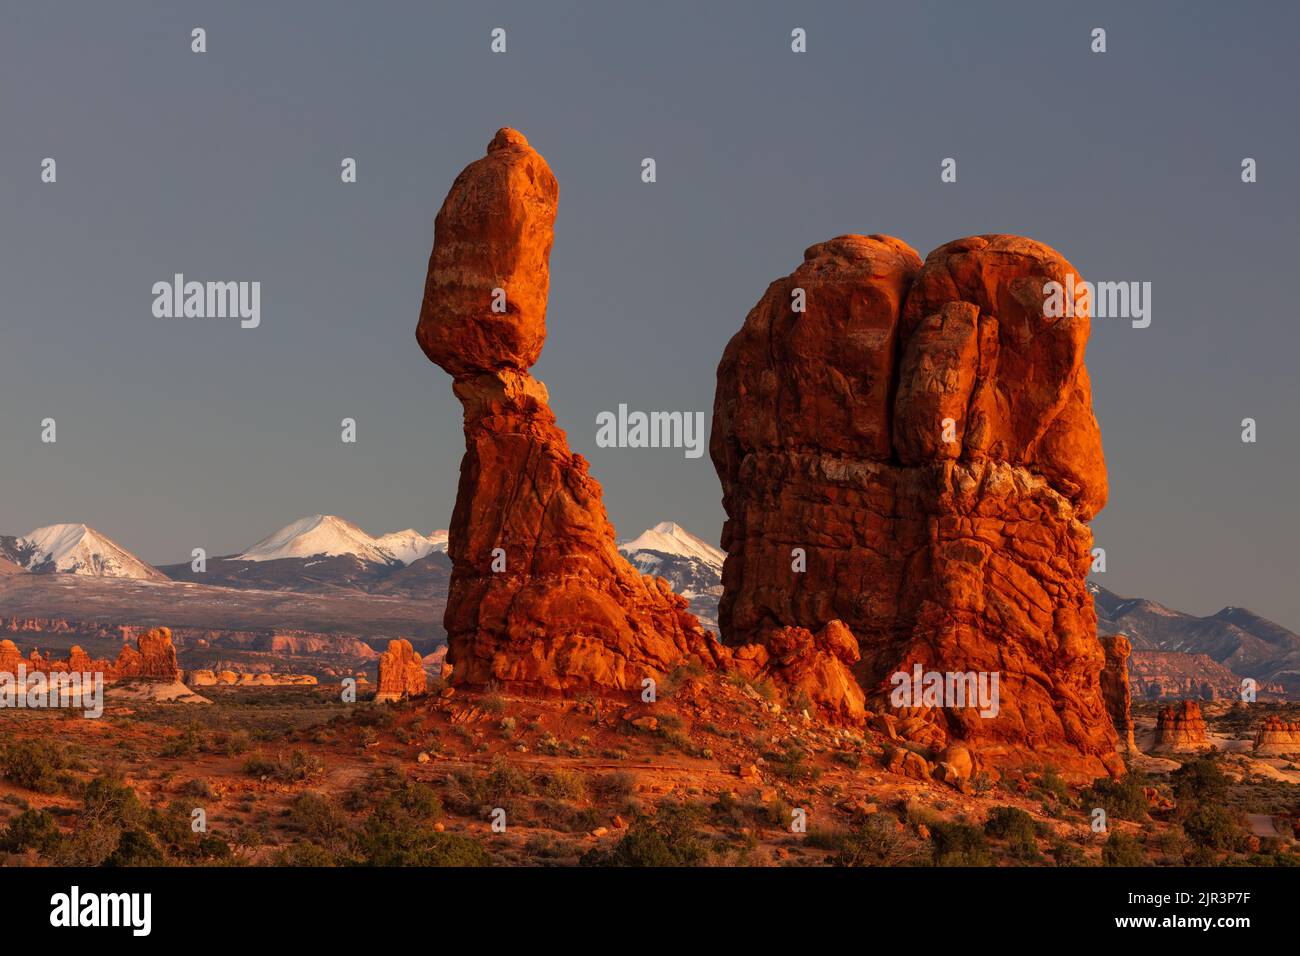 Balanced Rock and the La Sal Mountains, at sunset, Arches National Park, Moab, Utah Stock Photo